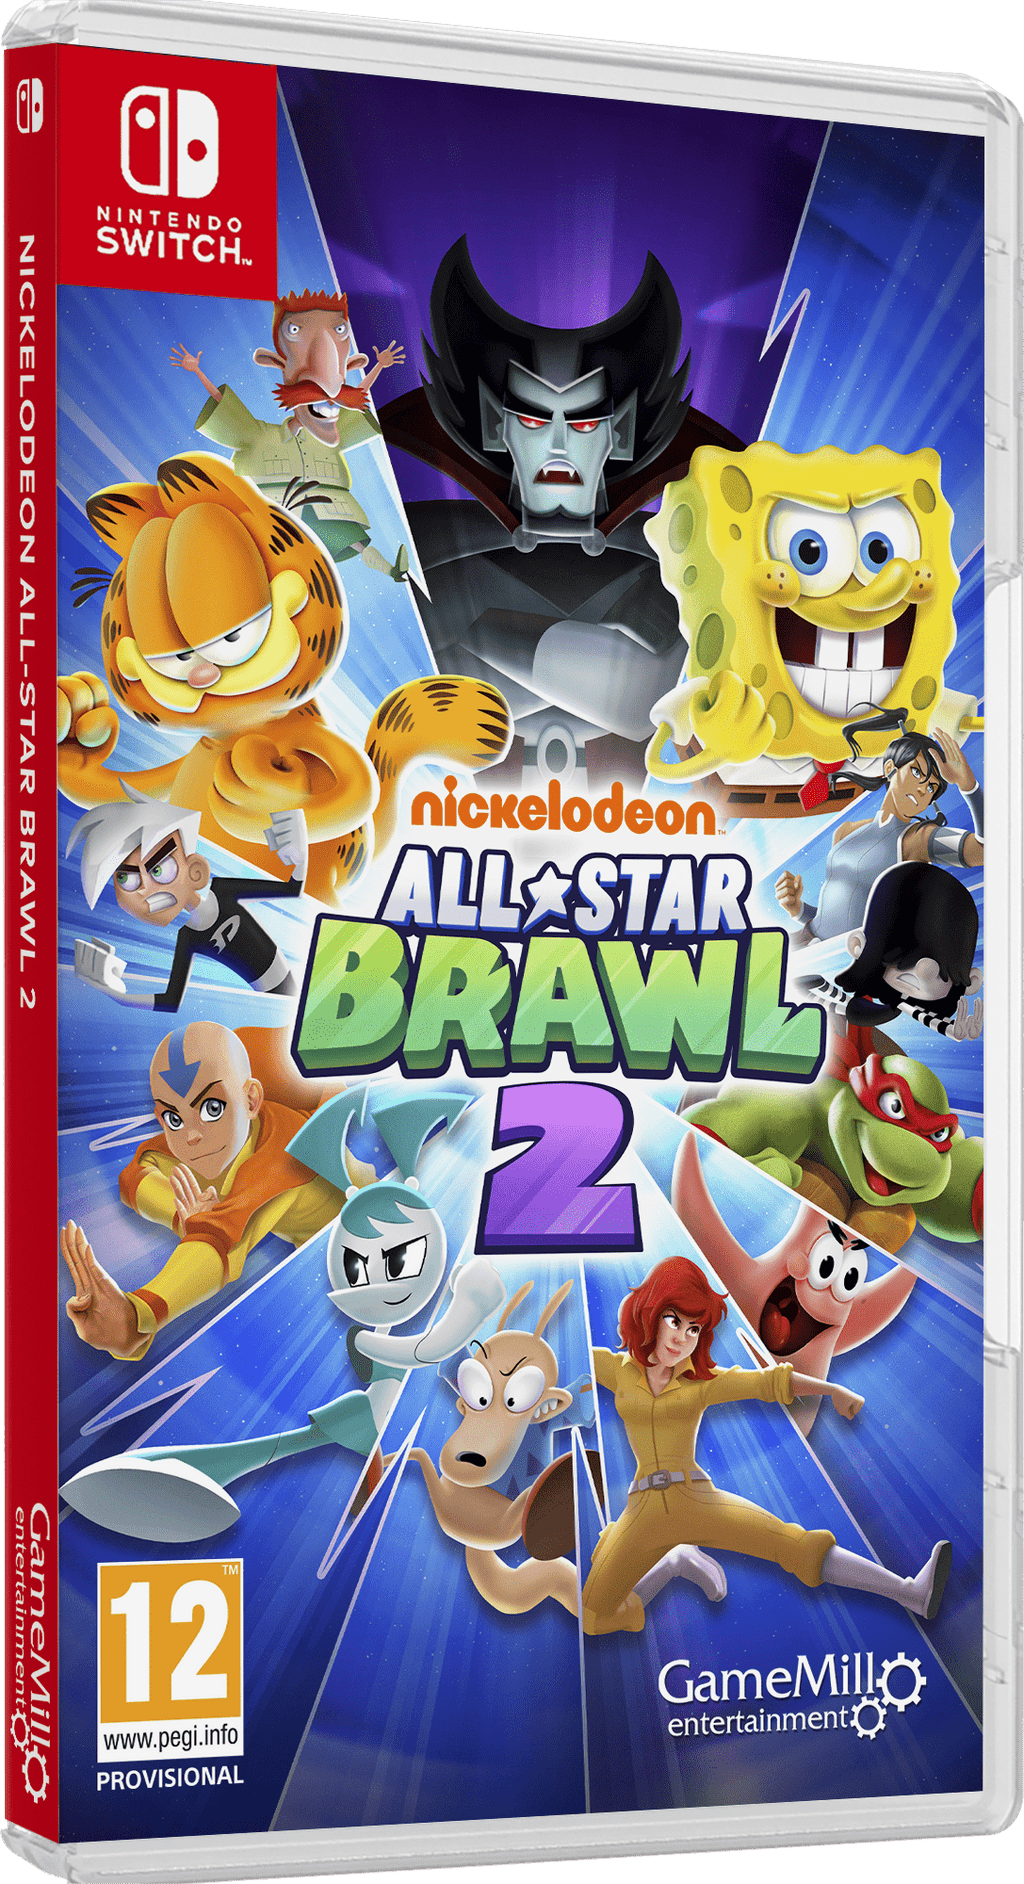 Nickelodeon All-Star Brawl 2 Digital Version will now release on November  7th, Retail Version will hit shelves in December 1st : r/NintendoSwitch